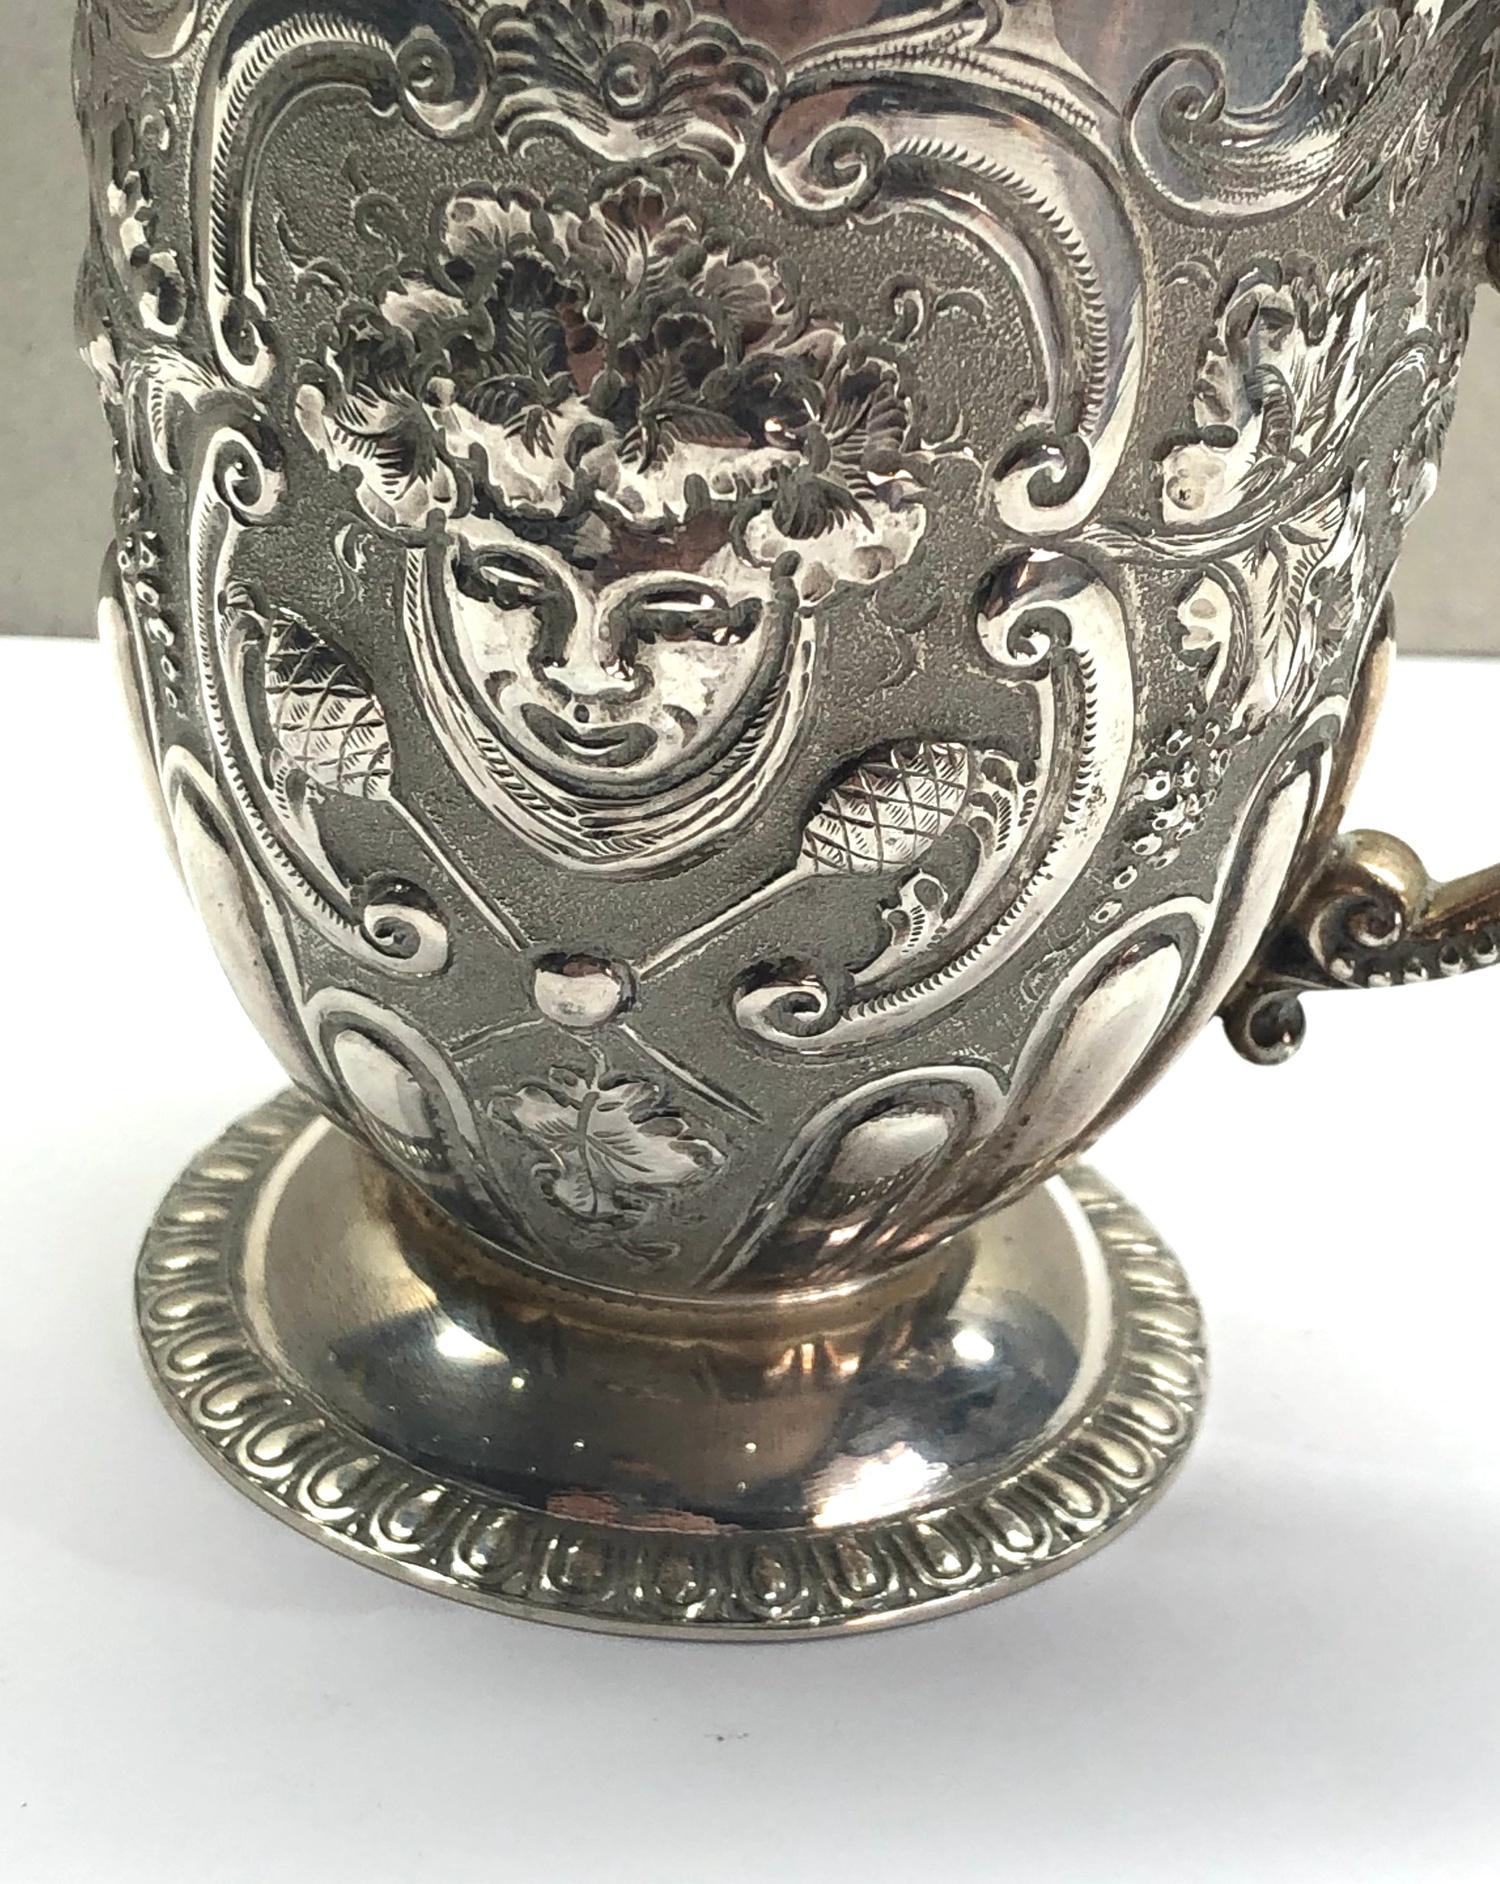 Antique ornate silver mug London silver hallmarks engraved initials measures approx. height 9cm - Image 3 of 5